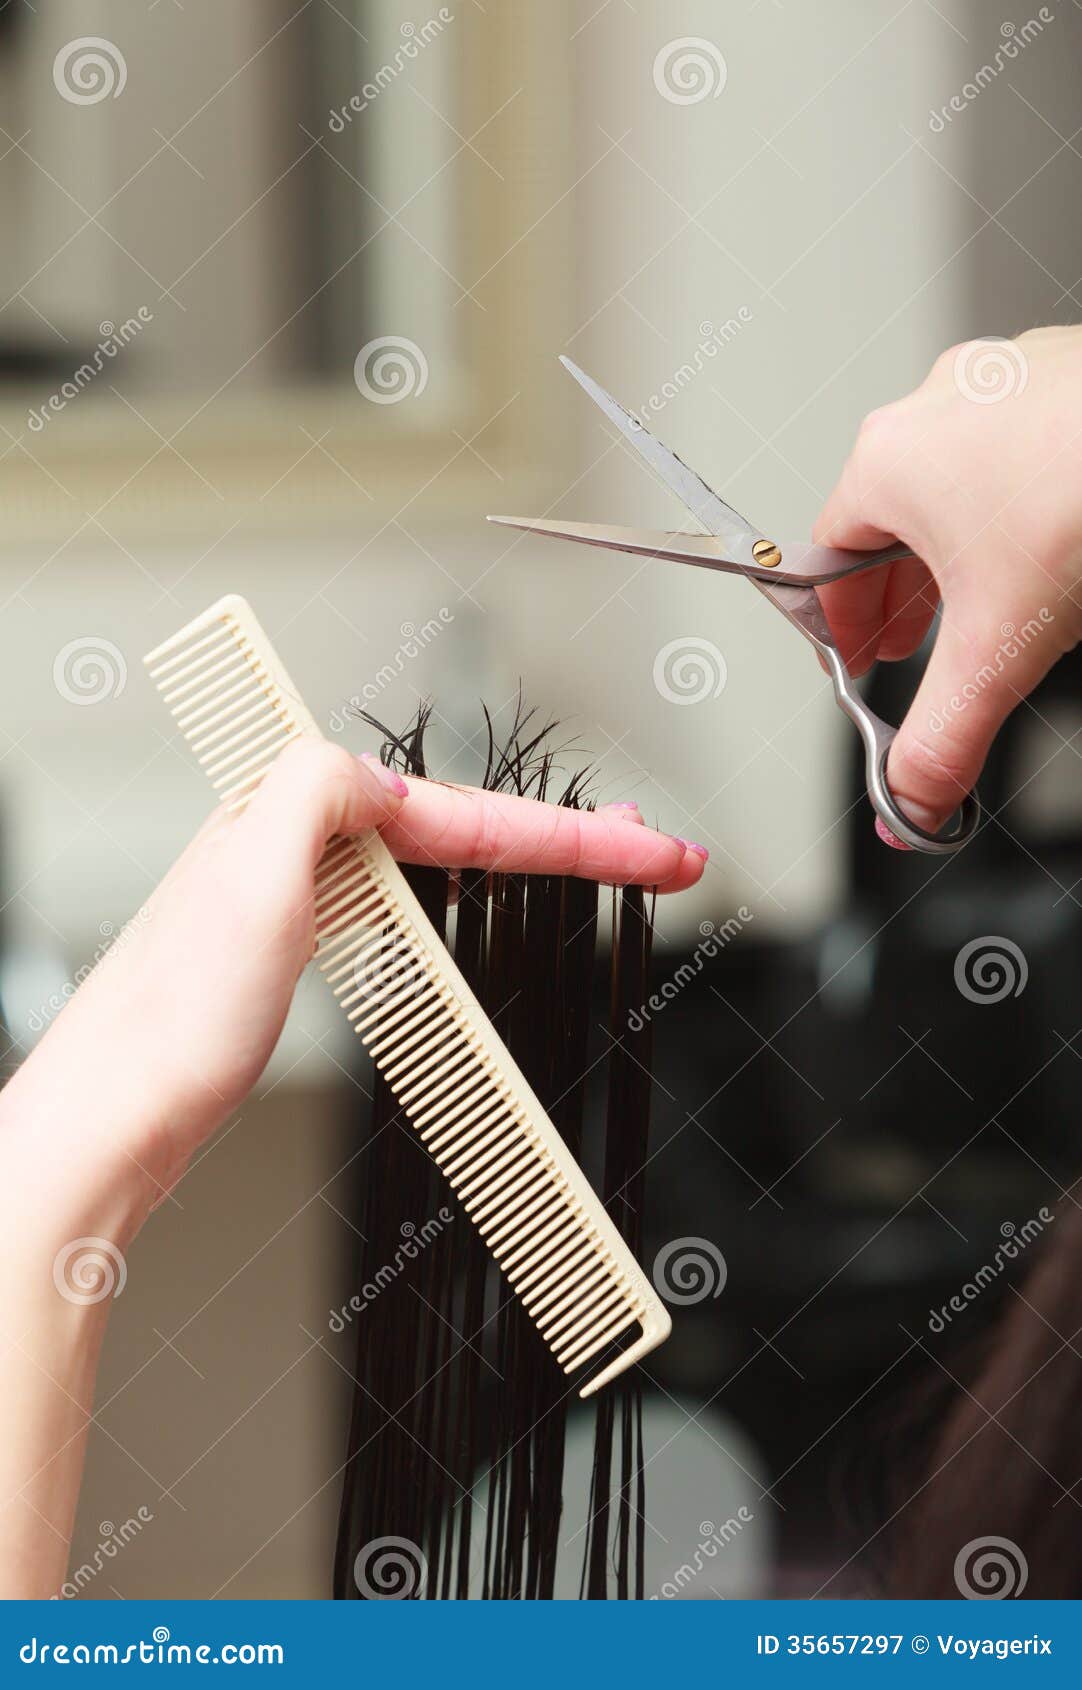 Hairstylist Cutting Hair Woman Client In Hairdressing 